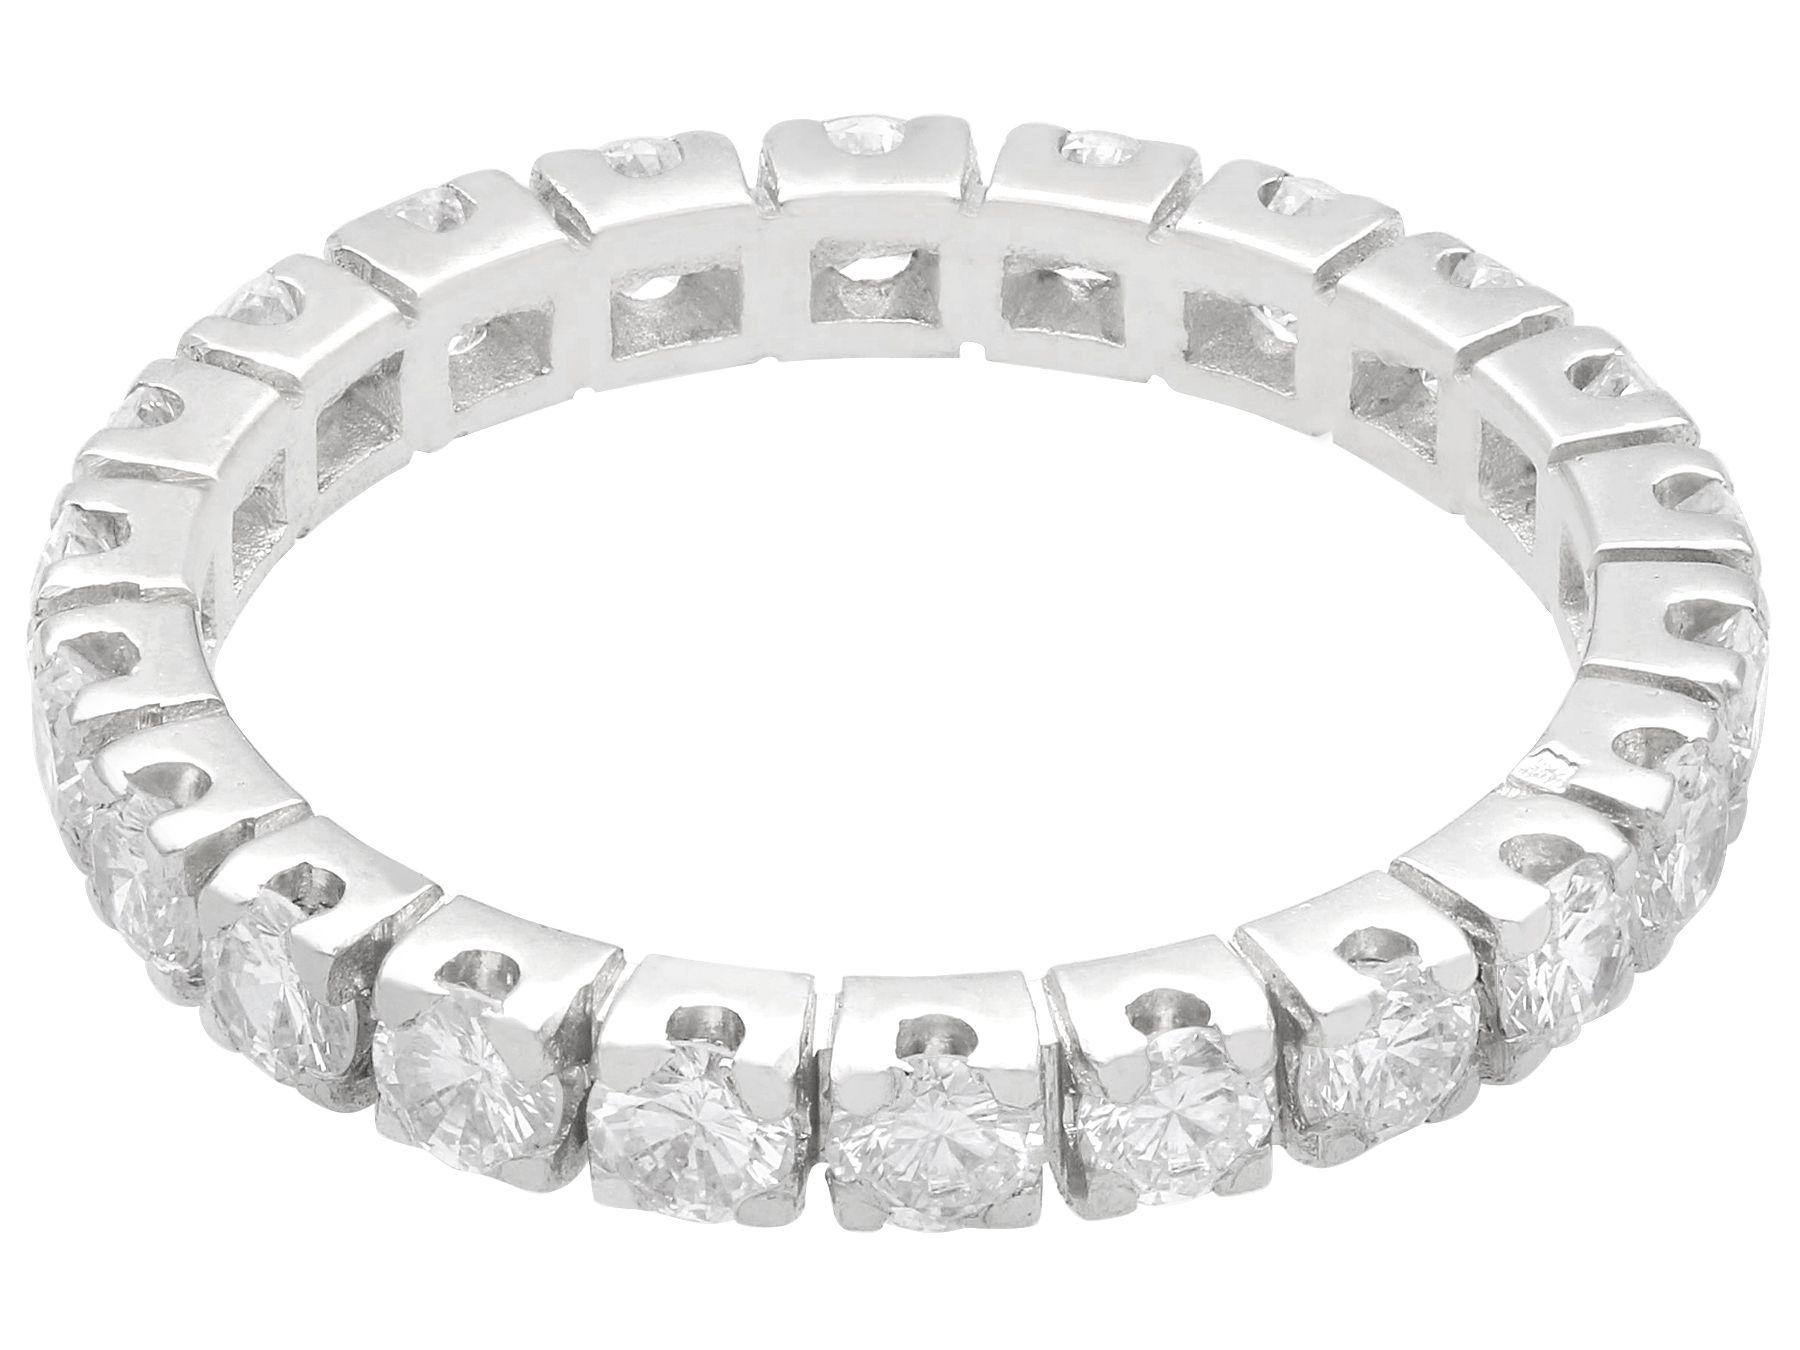 Vintage French 1.10 Carat Diamond and White Gold Full Eternity Ring - Circa 1950 In Excellent Condition For Sale In Jesmond, Newcastle Upon Tyne